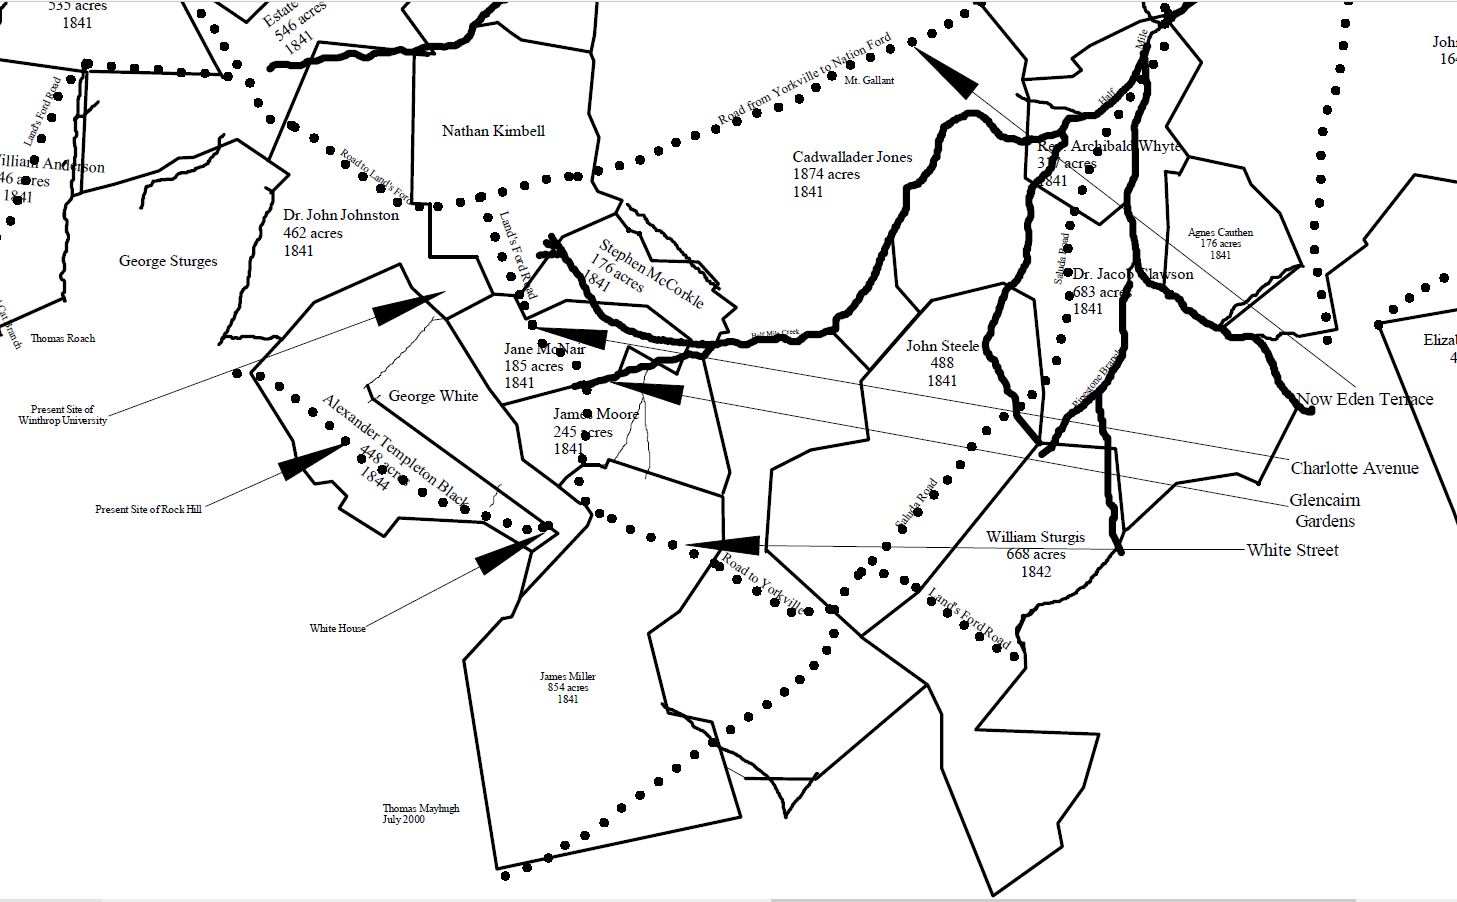 Section of Indianland Heritage Map by Mayhugh.  See ENLARGEABLE MAP under the primary image.